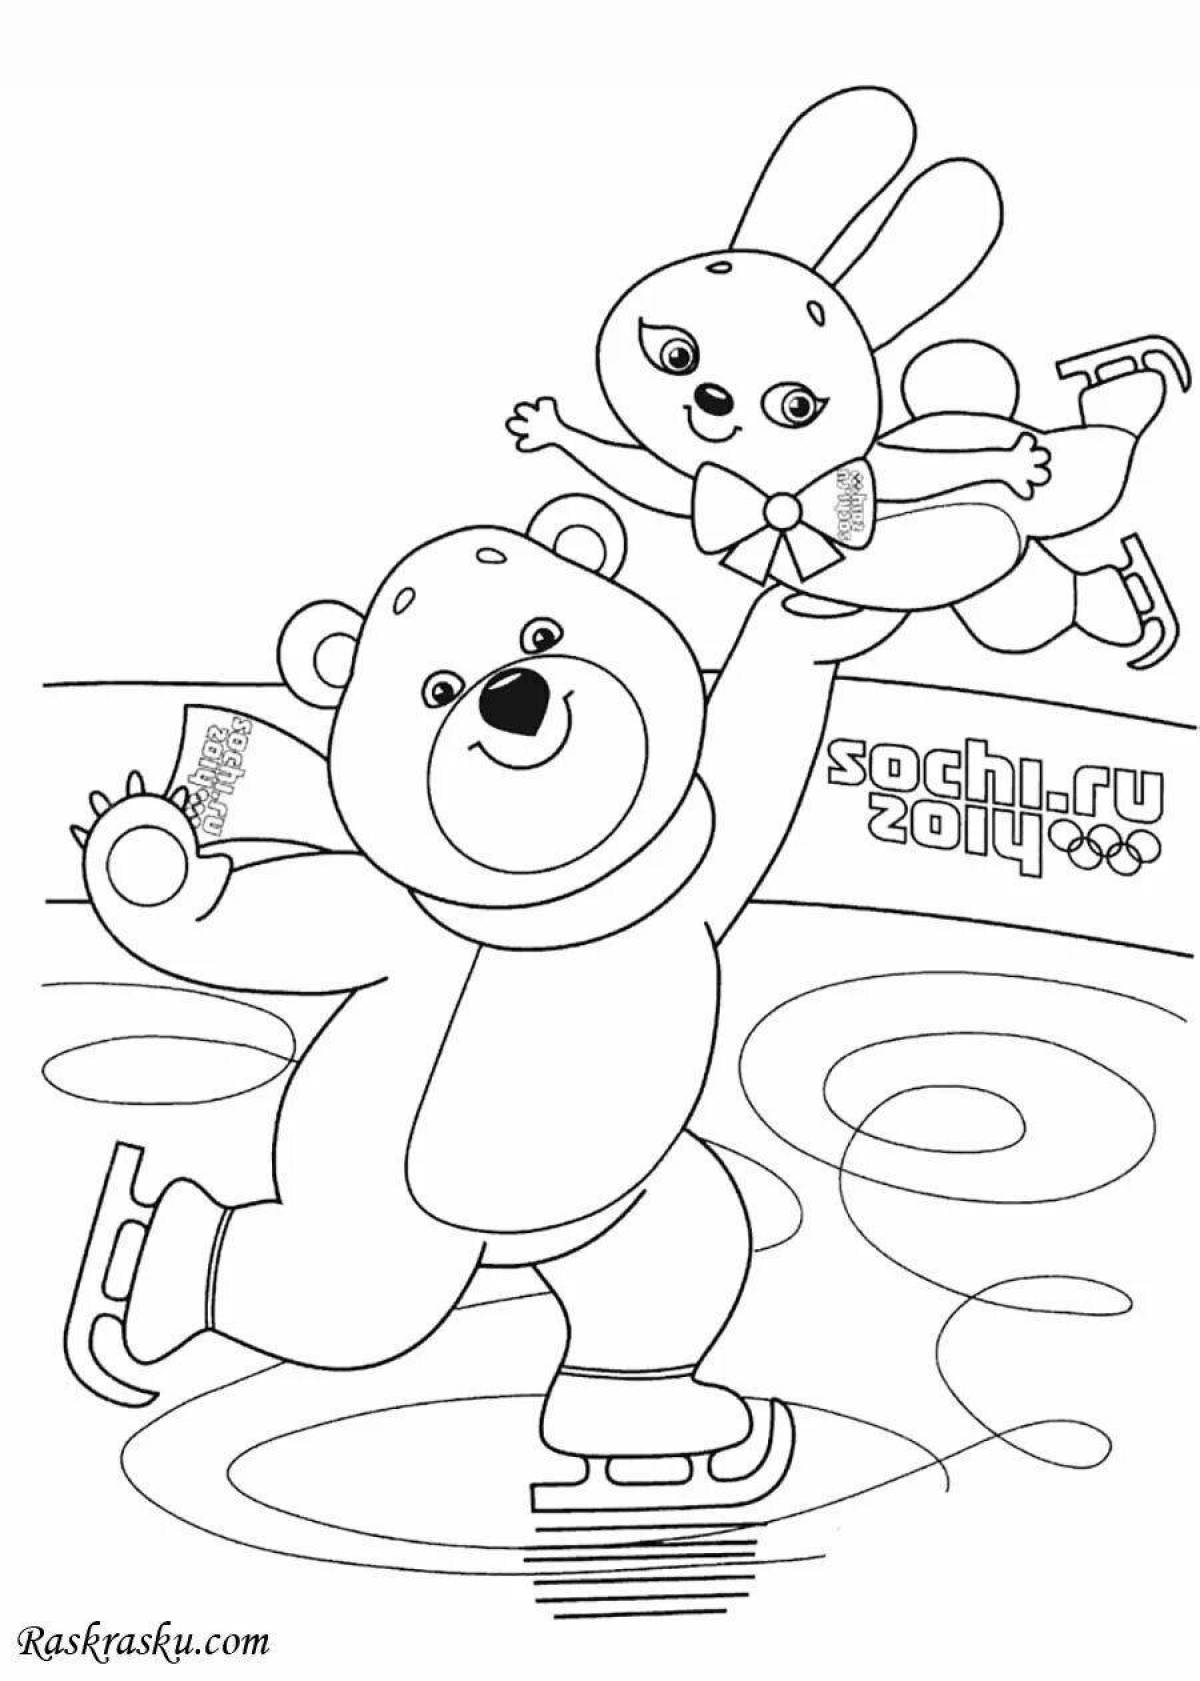 Colouring bright winter olympic games